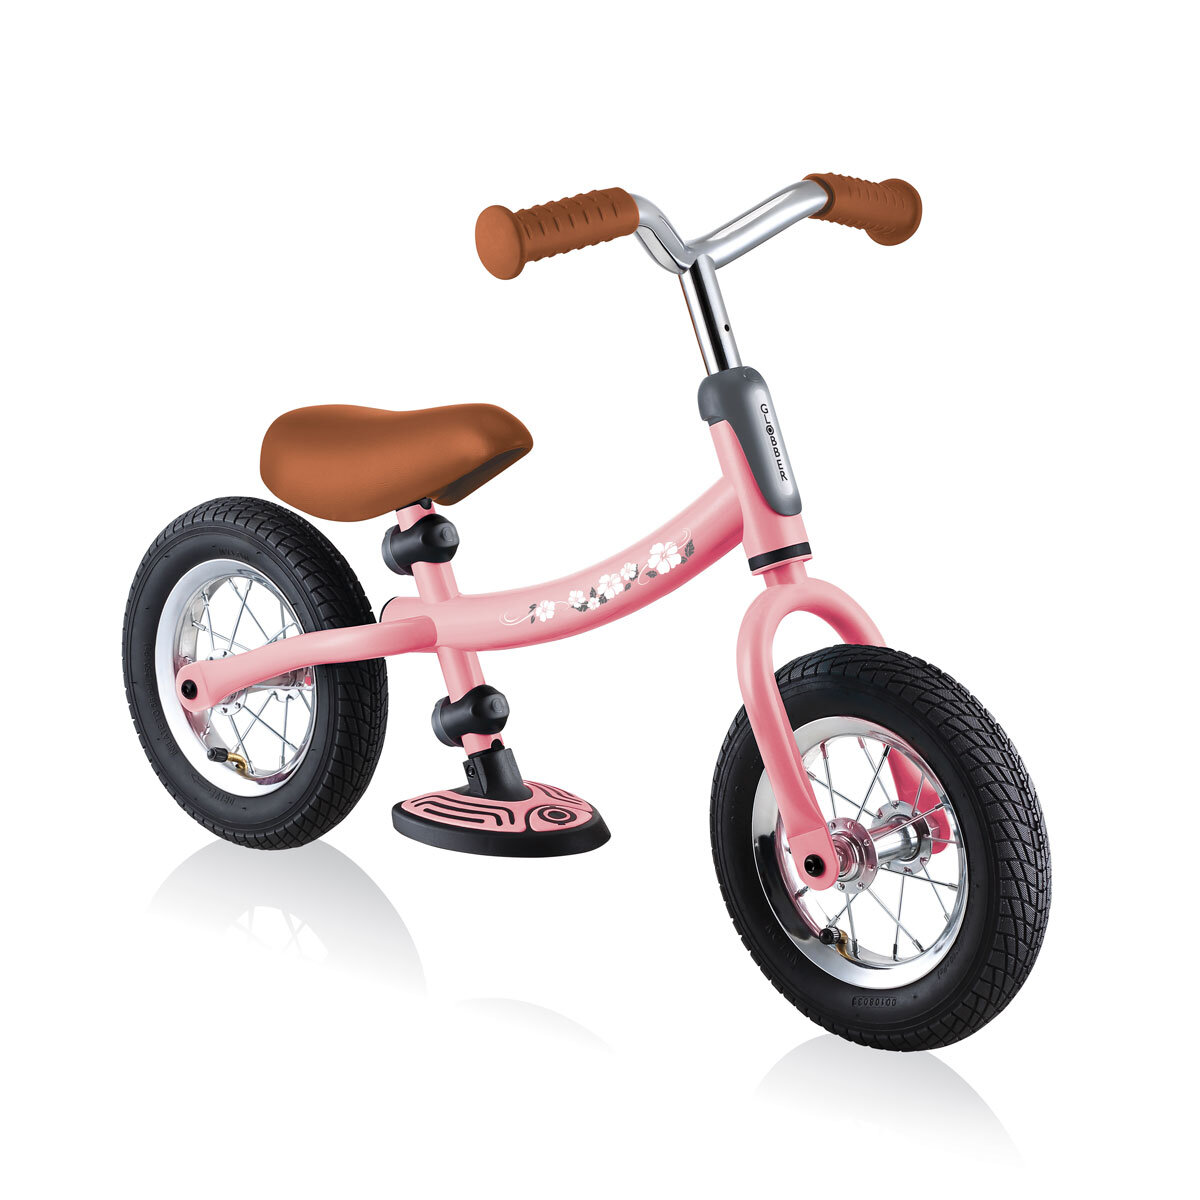 Buy Globber Go Bike Air Pastel Pink Overview2 Image at Costco.co.uk